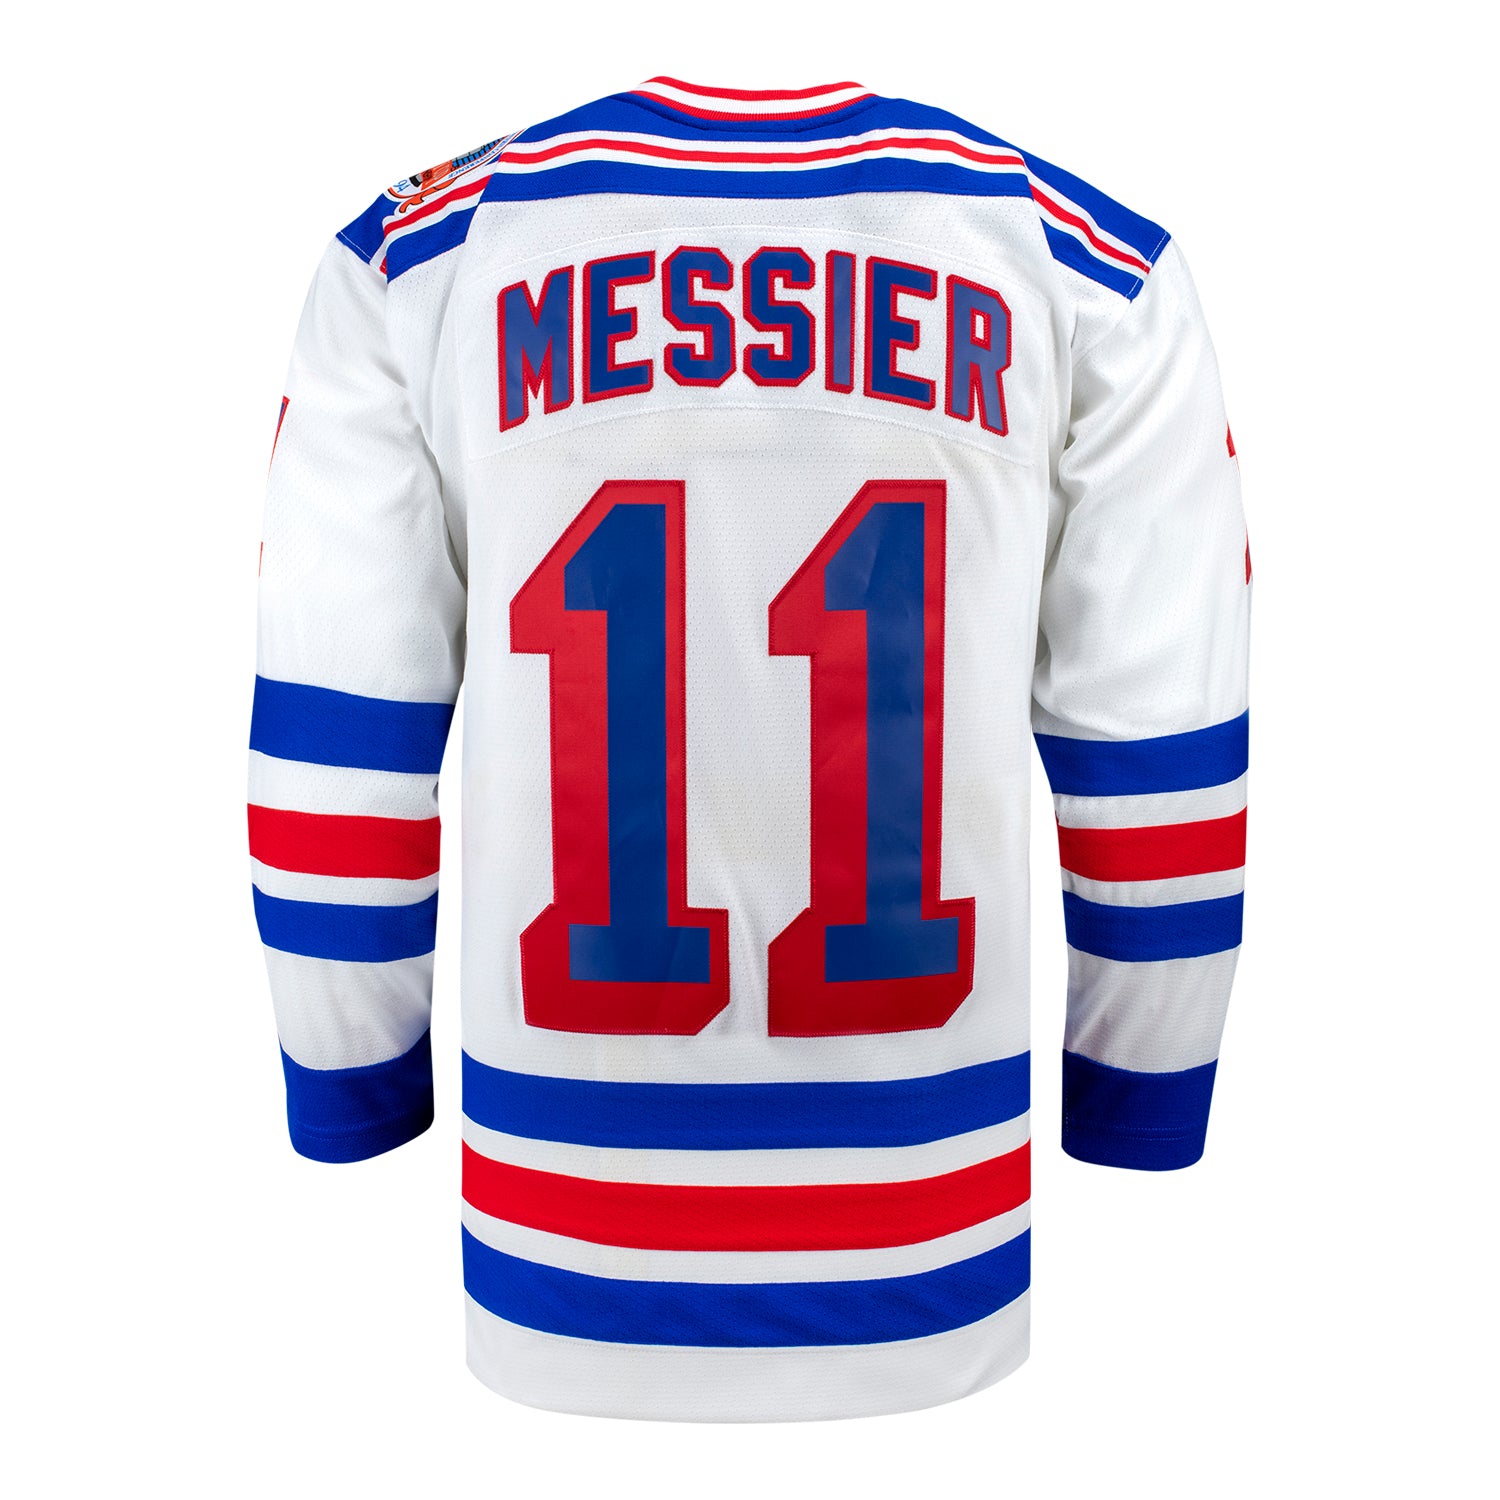 Authentic 1994 Mark Messier #11 NY Rangers Jersey - Mitchell & Ness - XL -  (NWT)